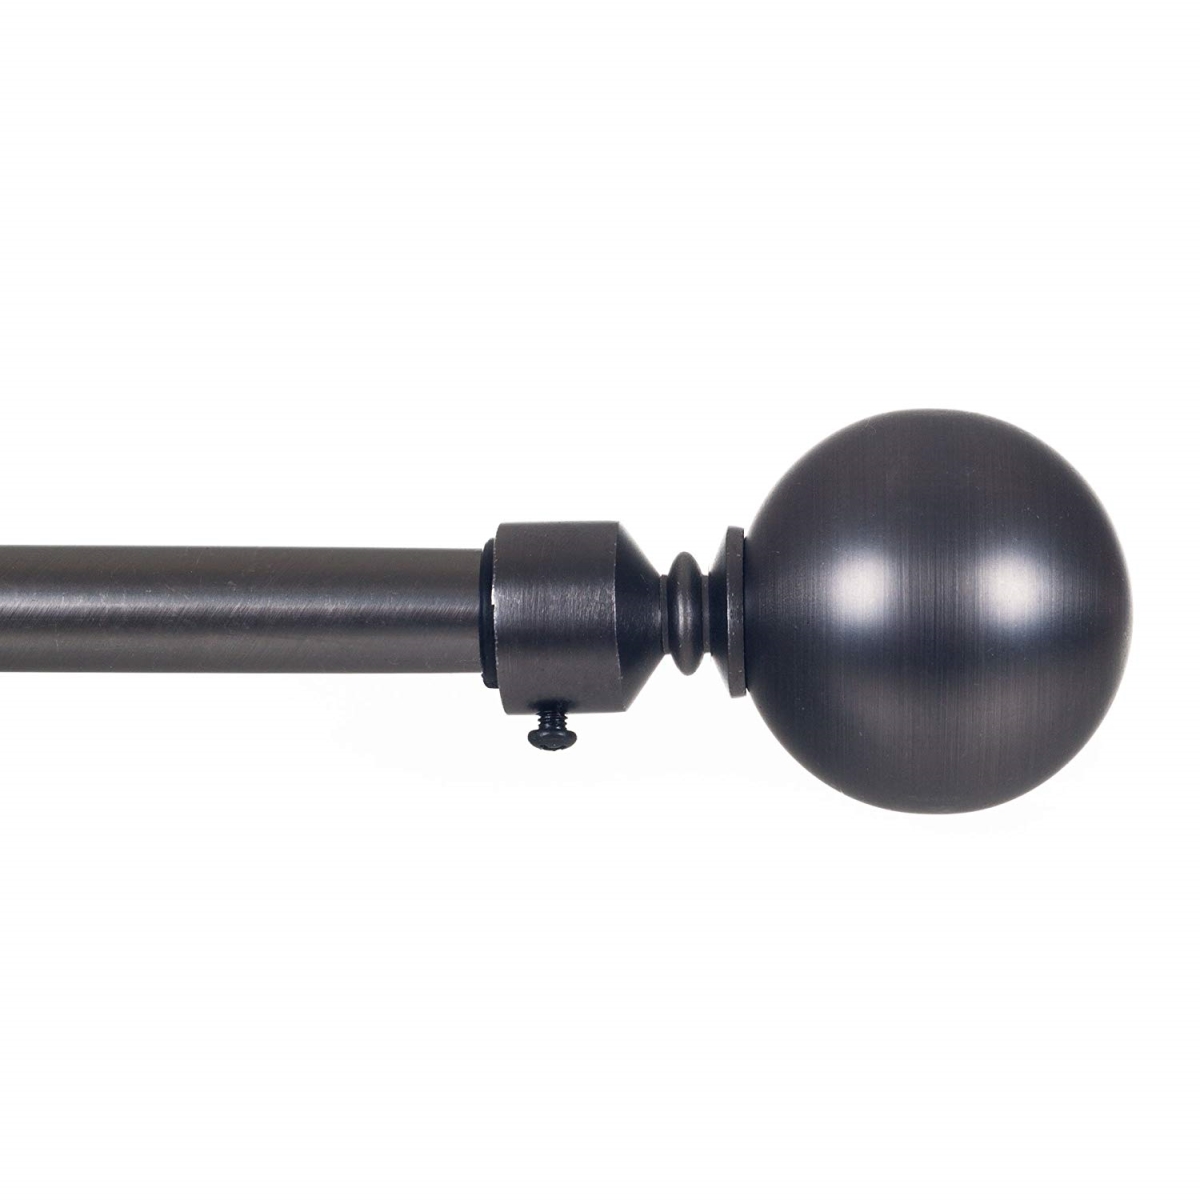 63a-19479 Sphere Curtain Rod For Window, Pewter - 0.75 In.